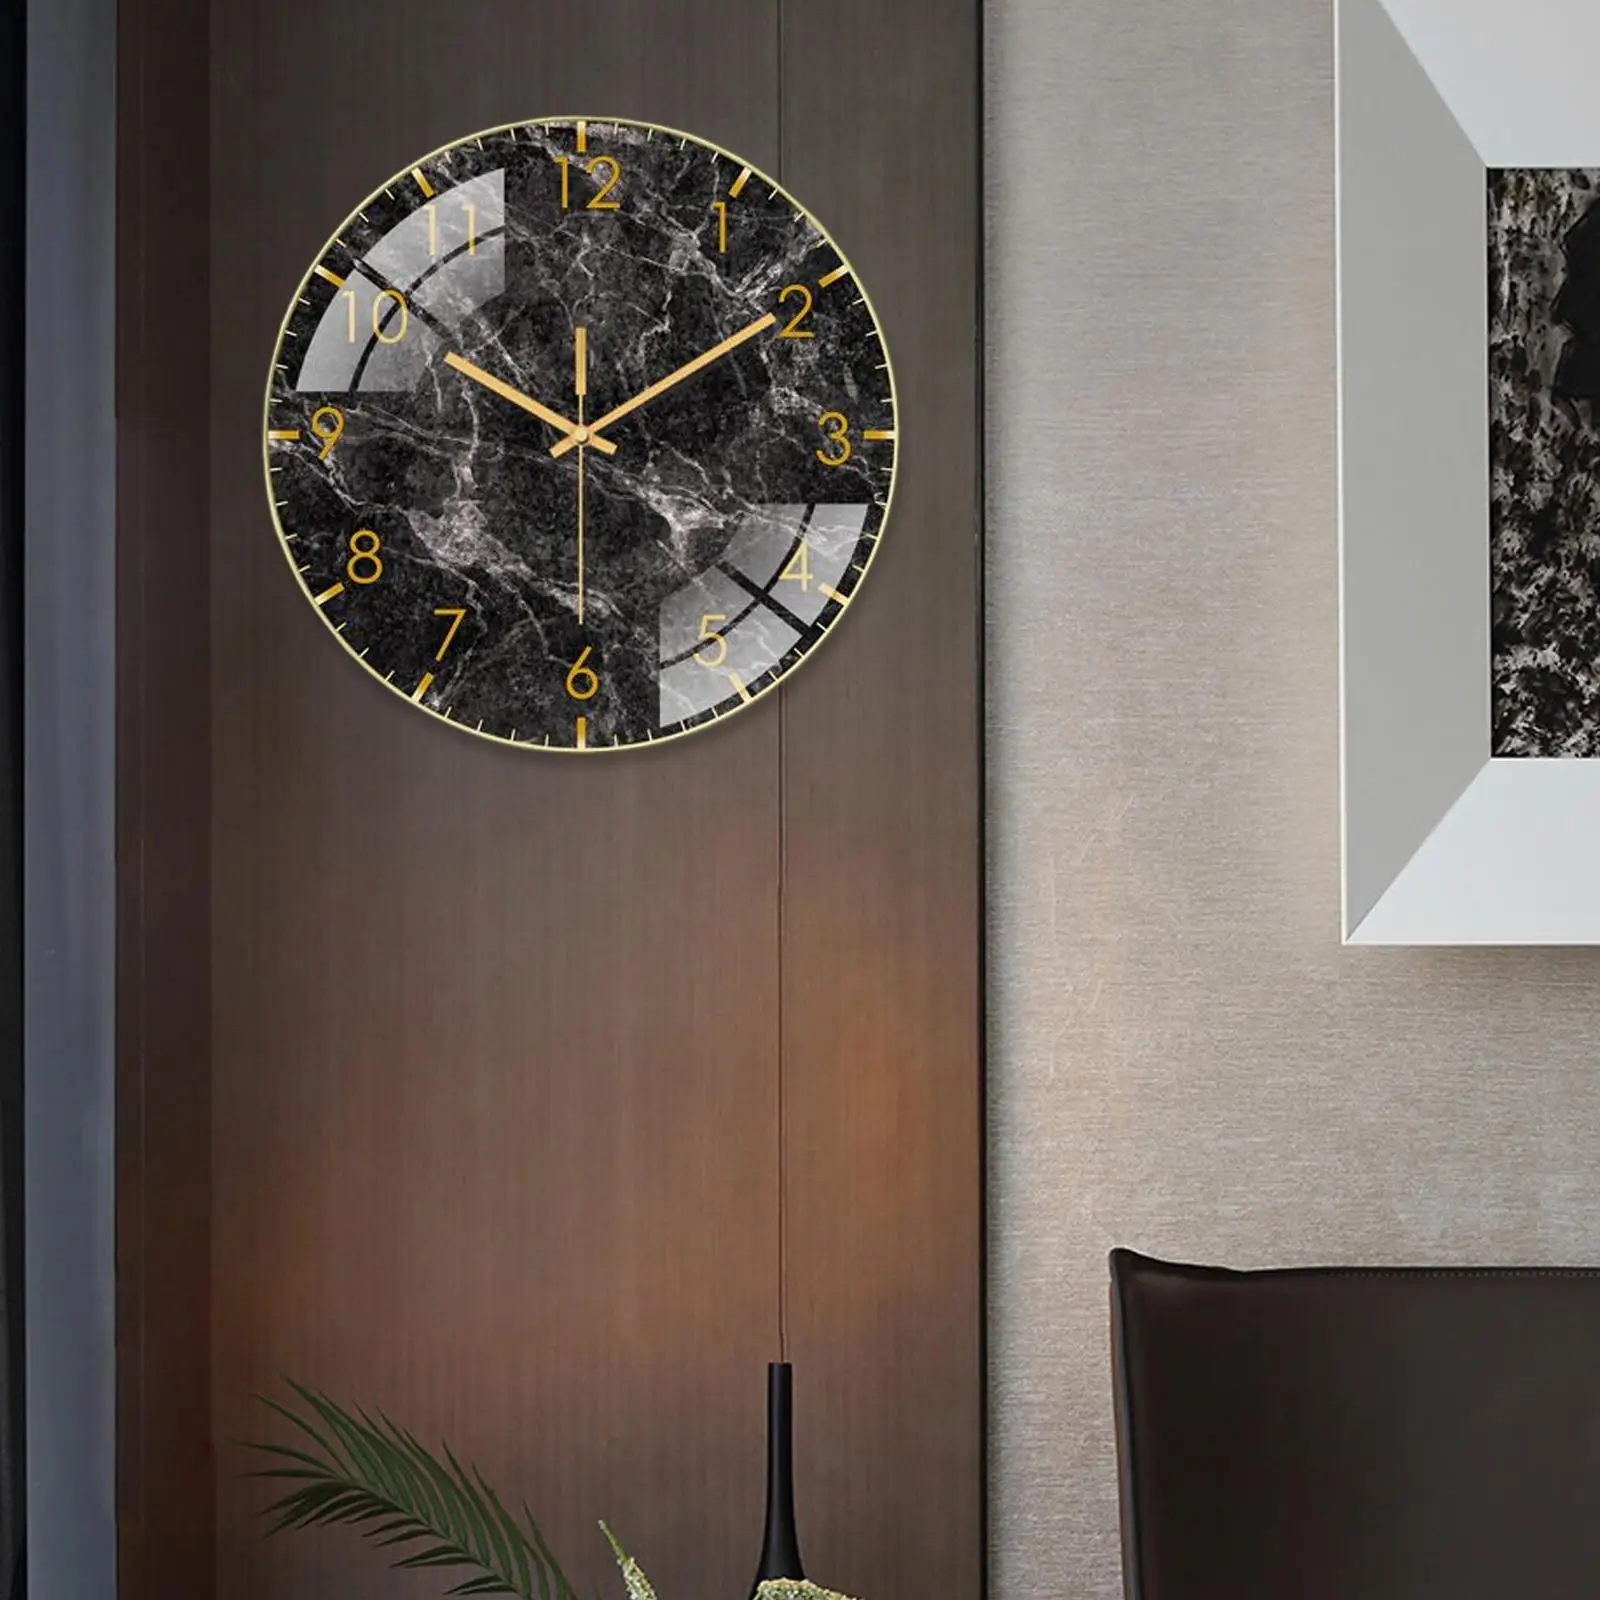 Modern Wall Clock Marbling 12 inch Battery Operated Round Silent Analog Non Ticking for Living Room Bedroom Home